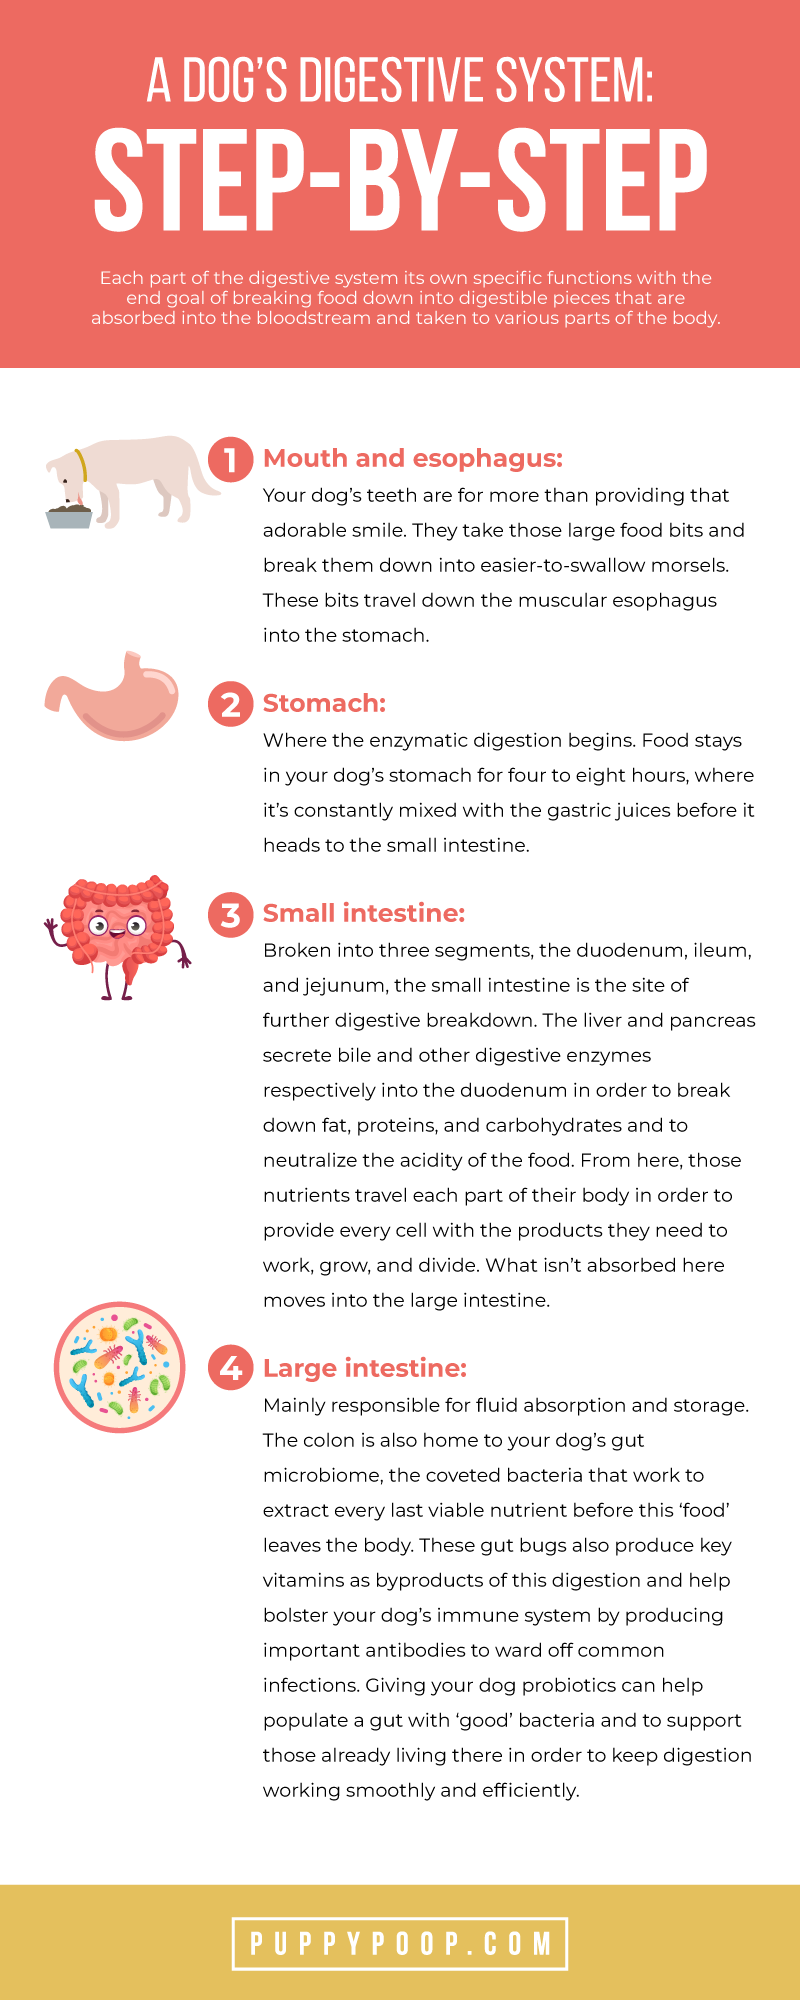 Step-by-Step guide to the dog digestive system with illustrations